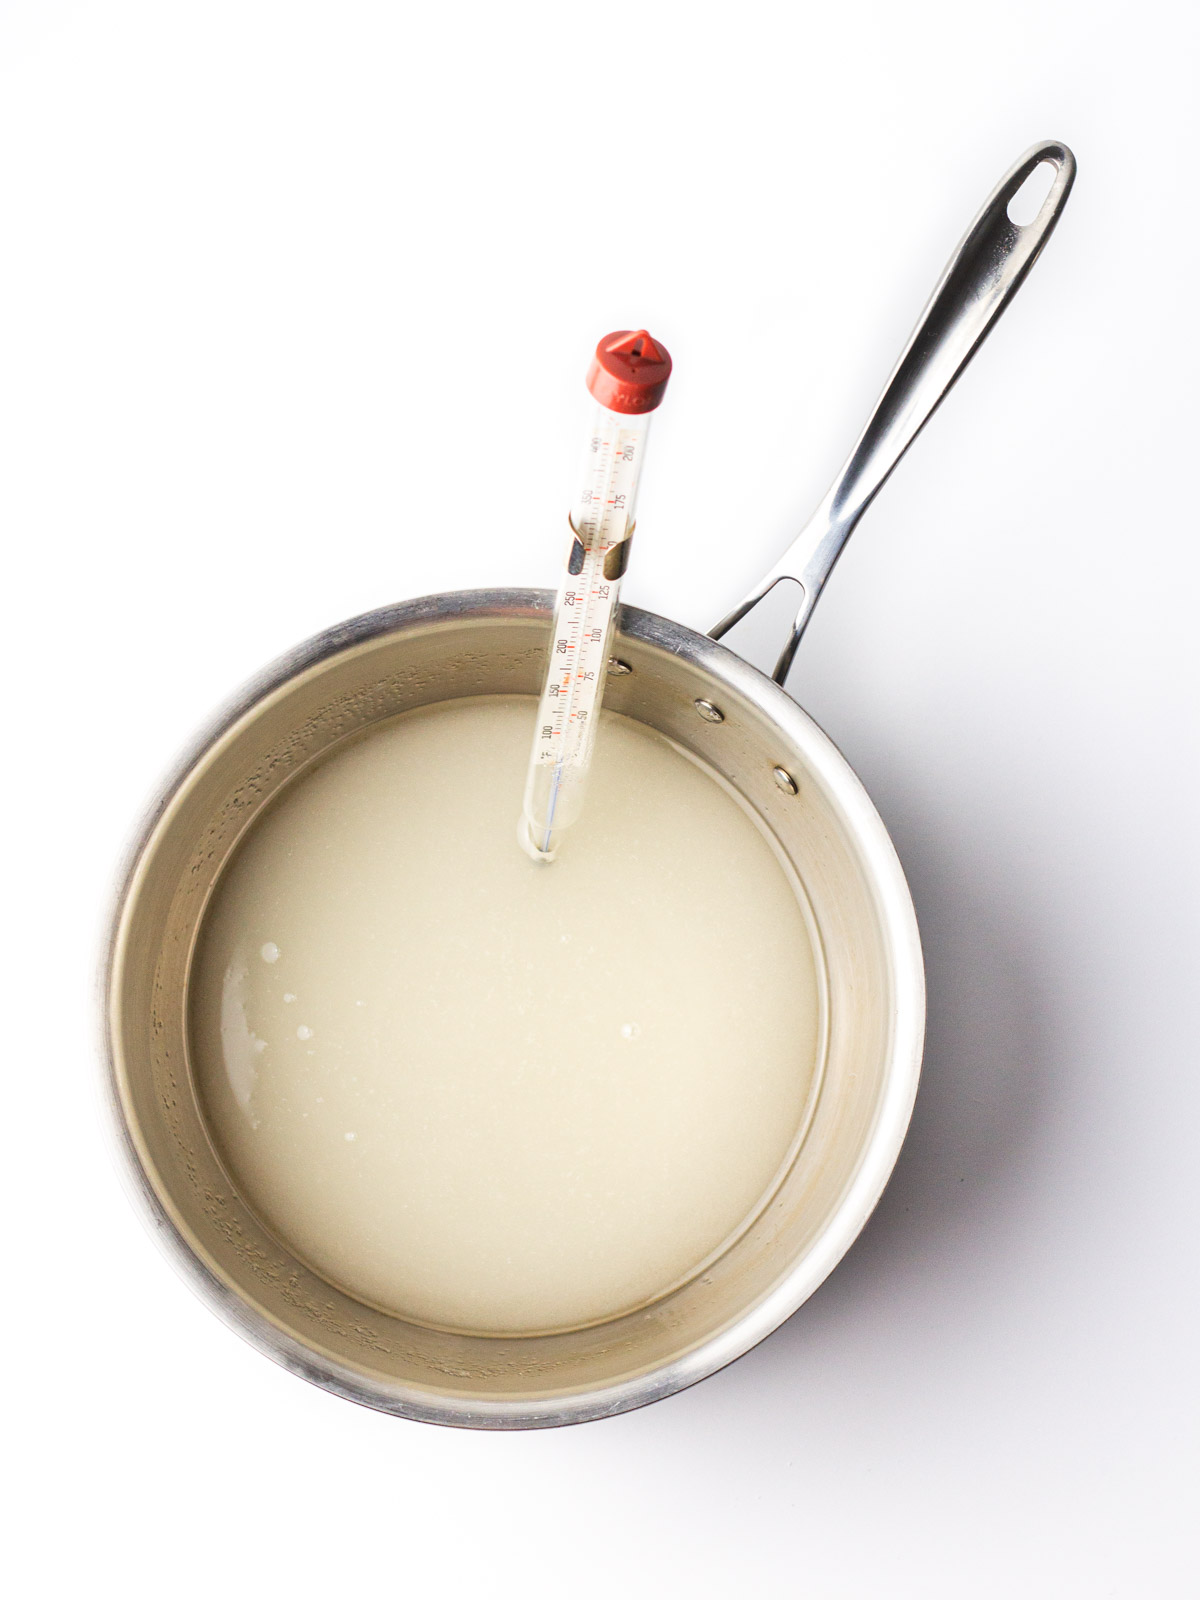 Sugar, corn syrup, and water in a saucepan with a candy thermometer clipped to the side of the pot.